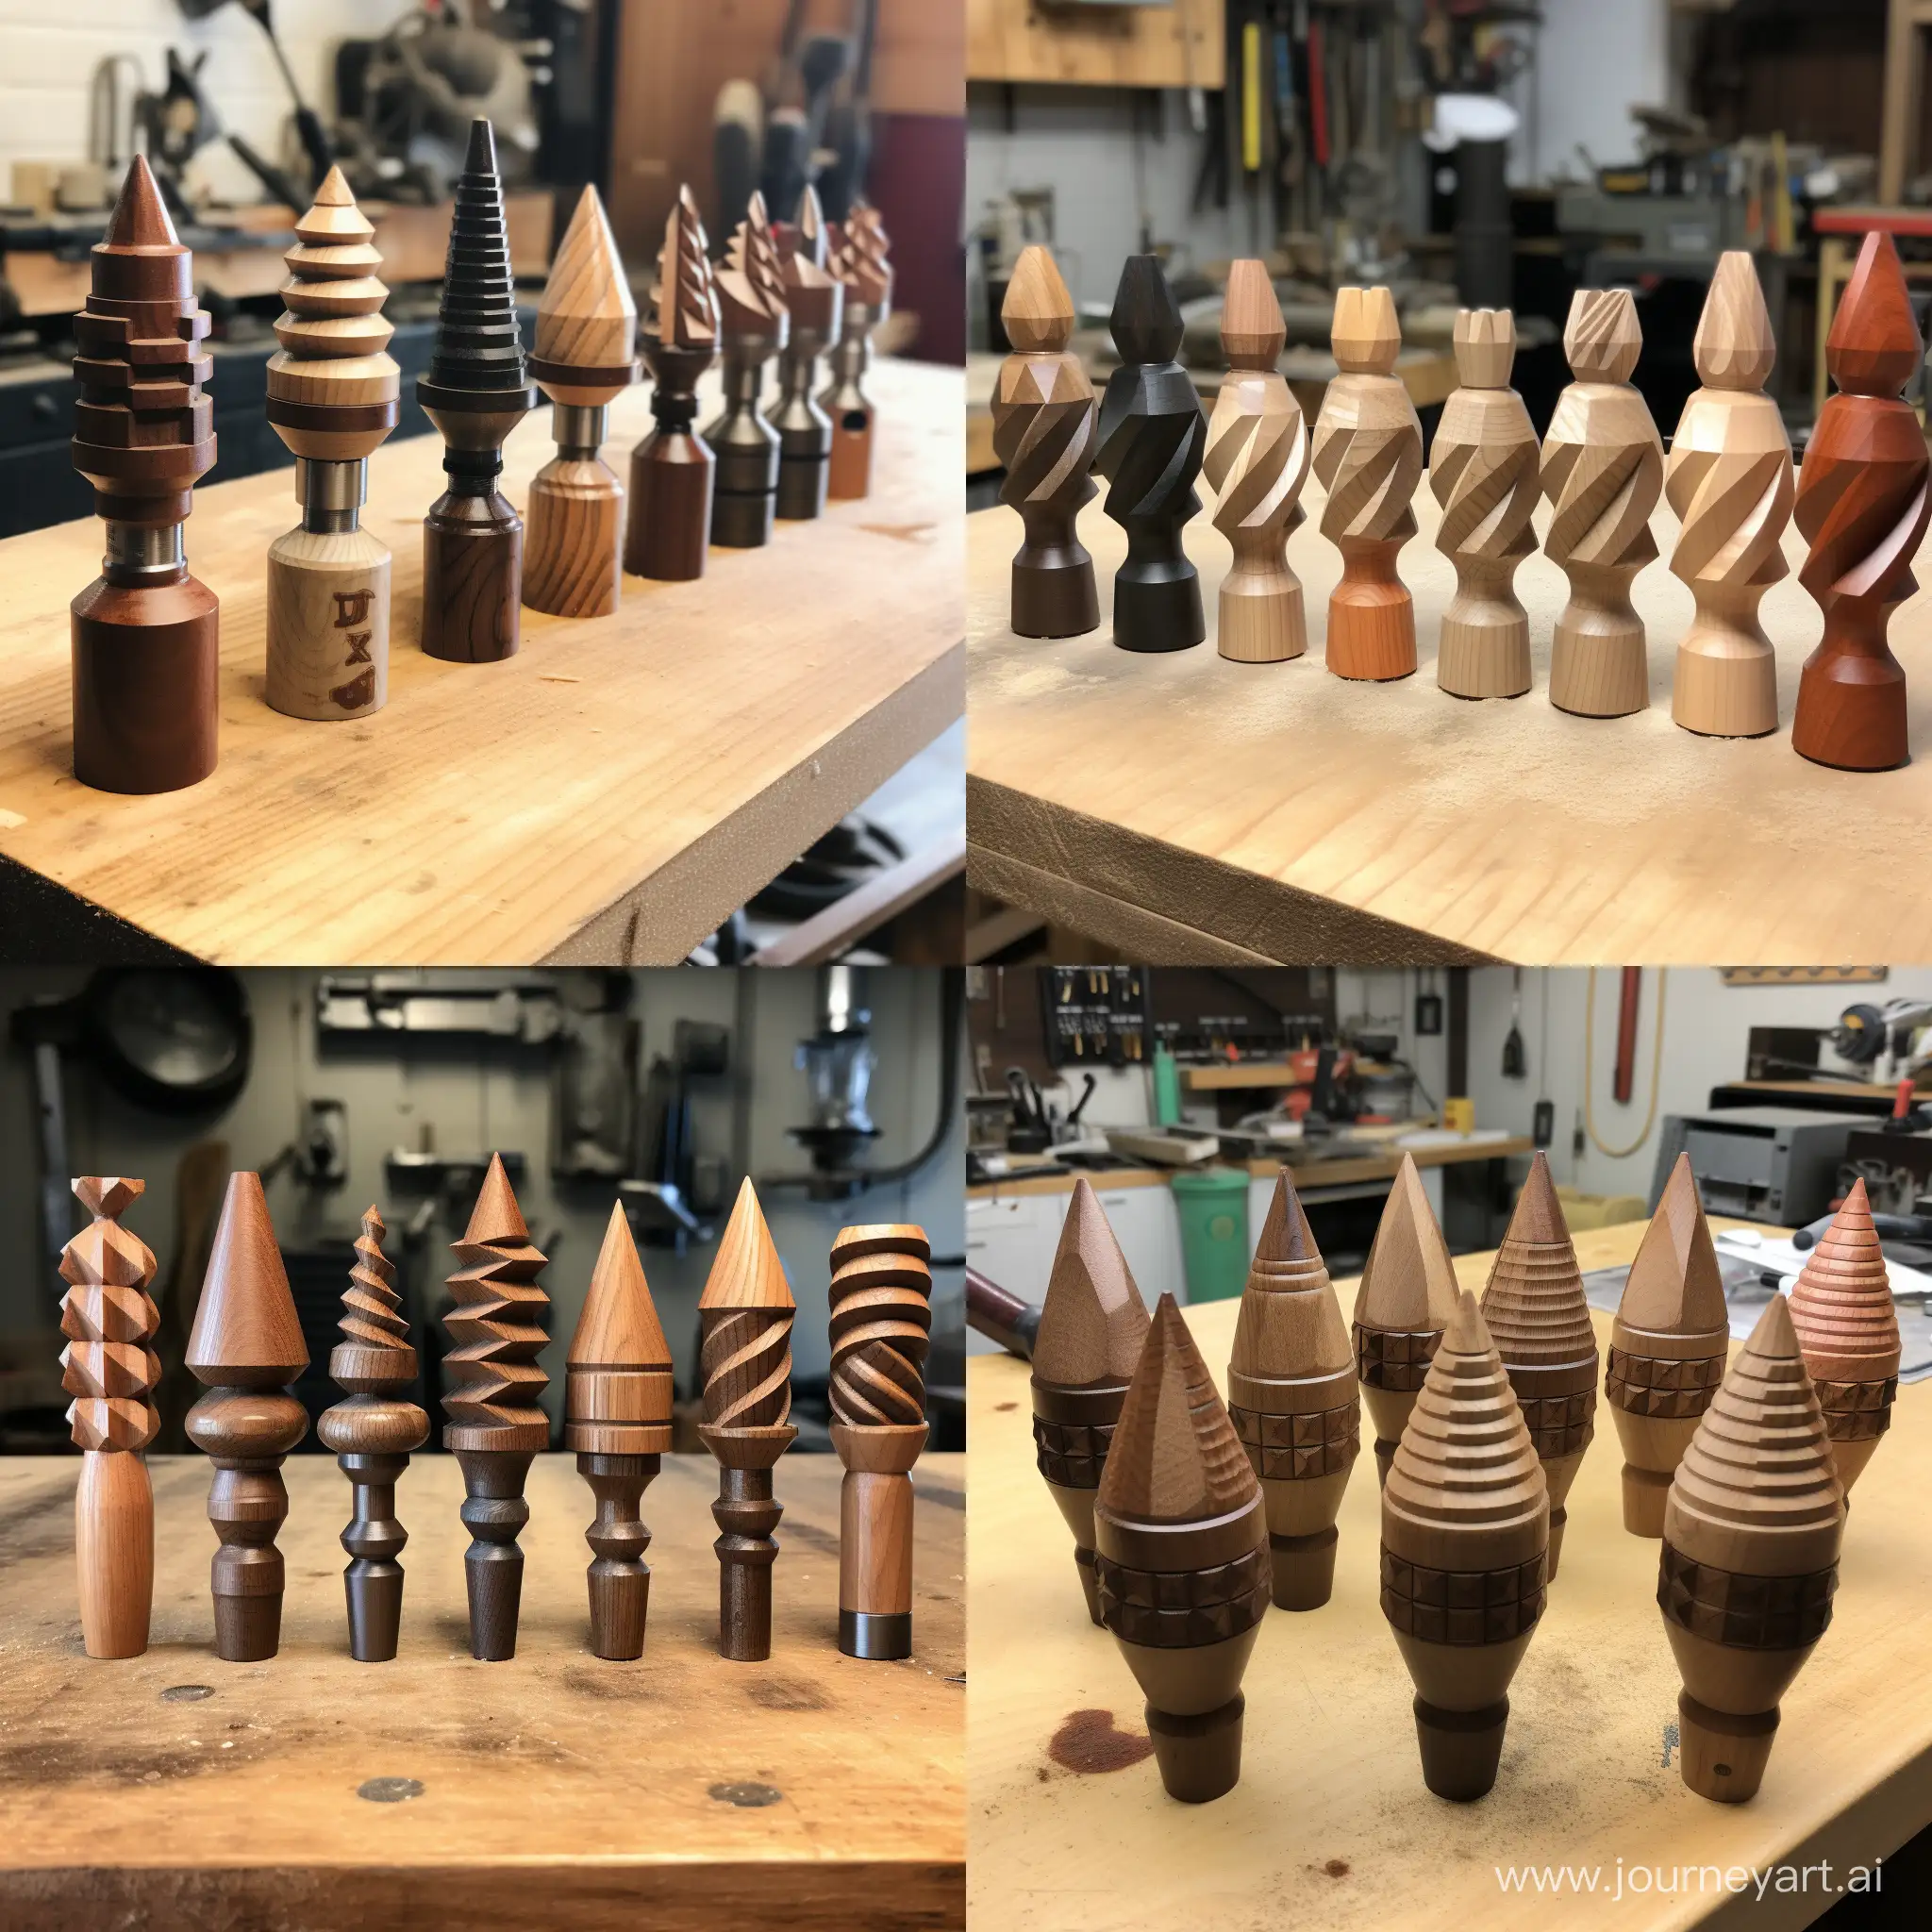 6 different lathe turning inserts in a row